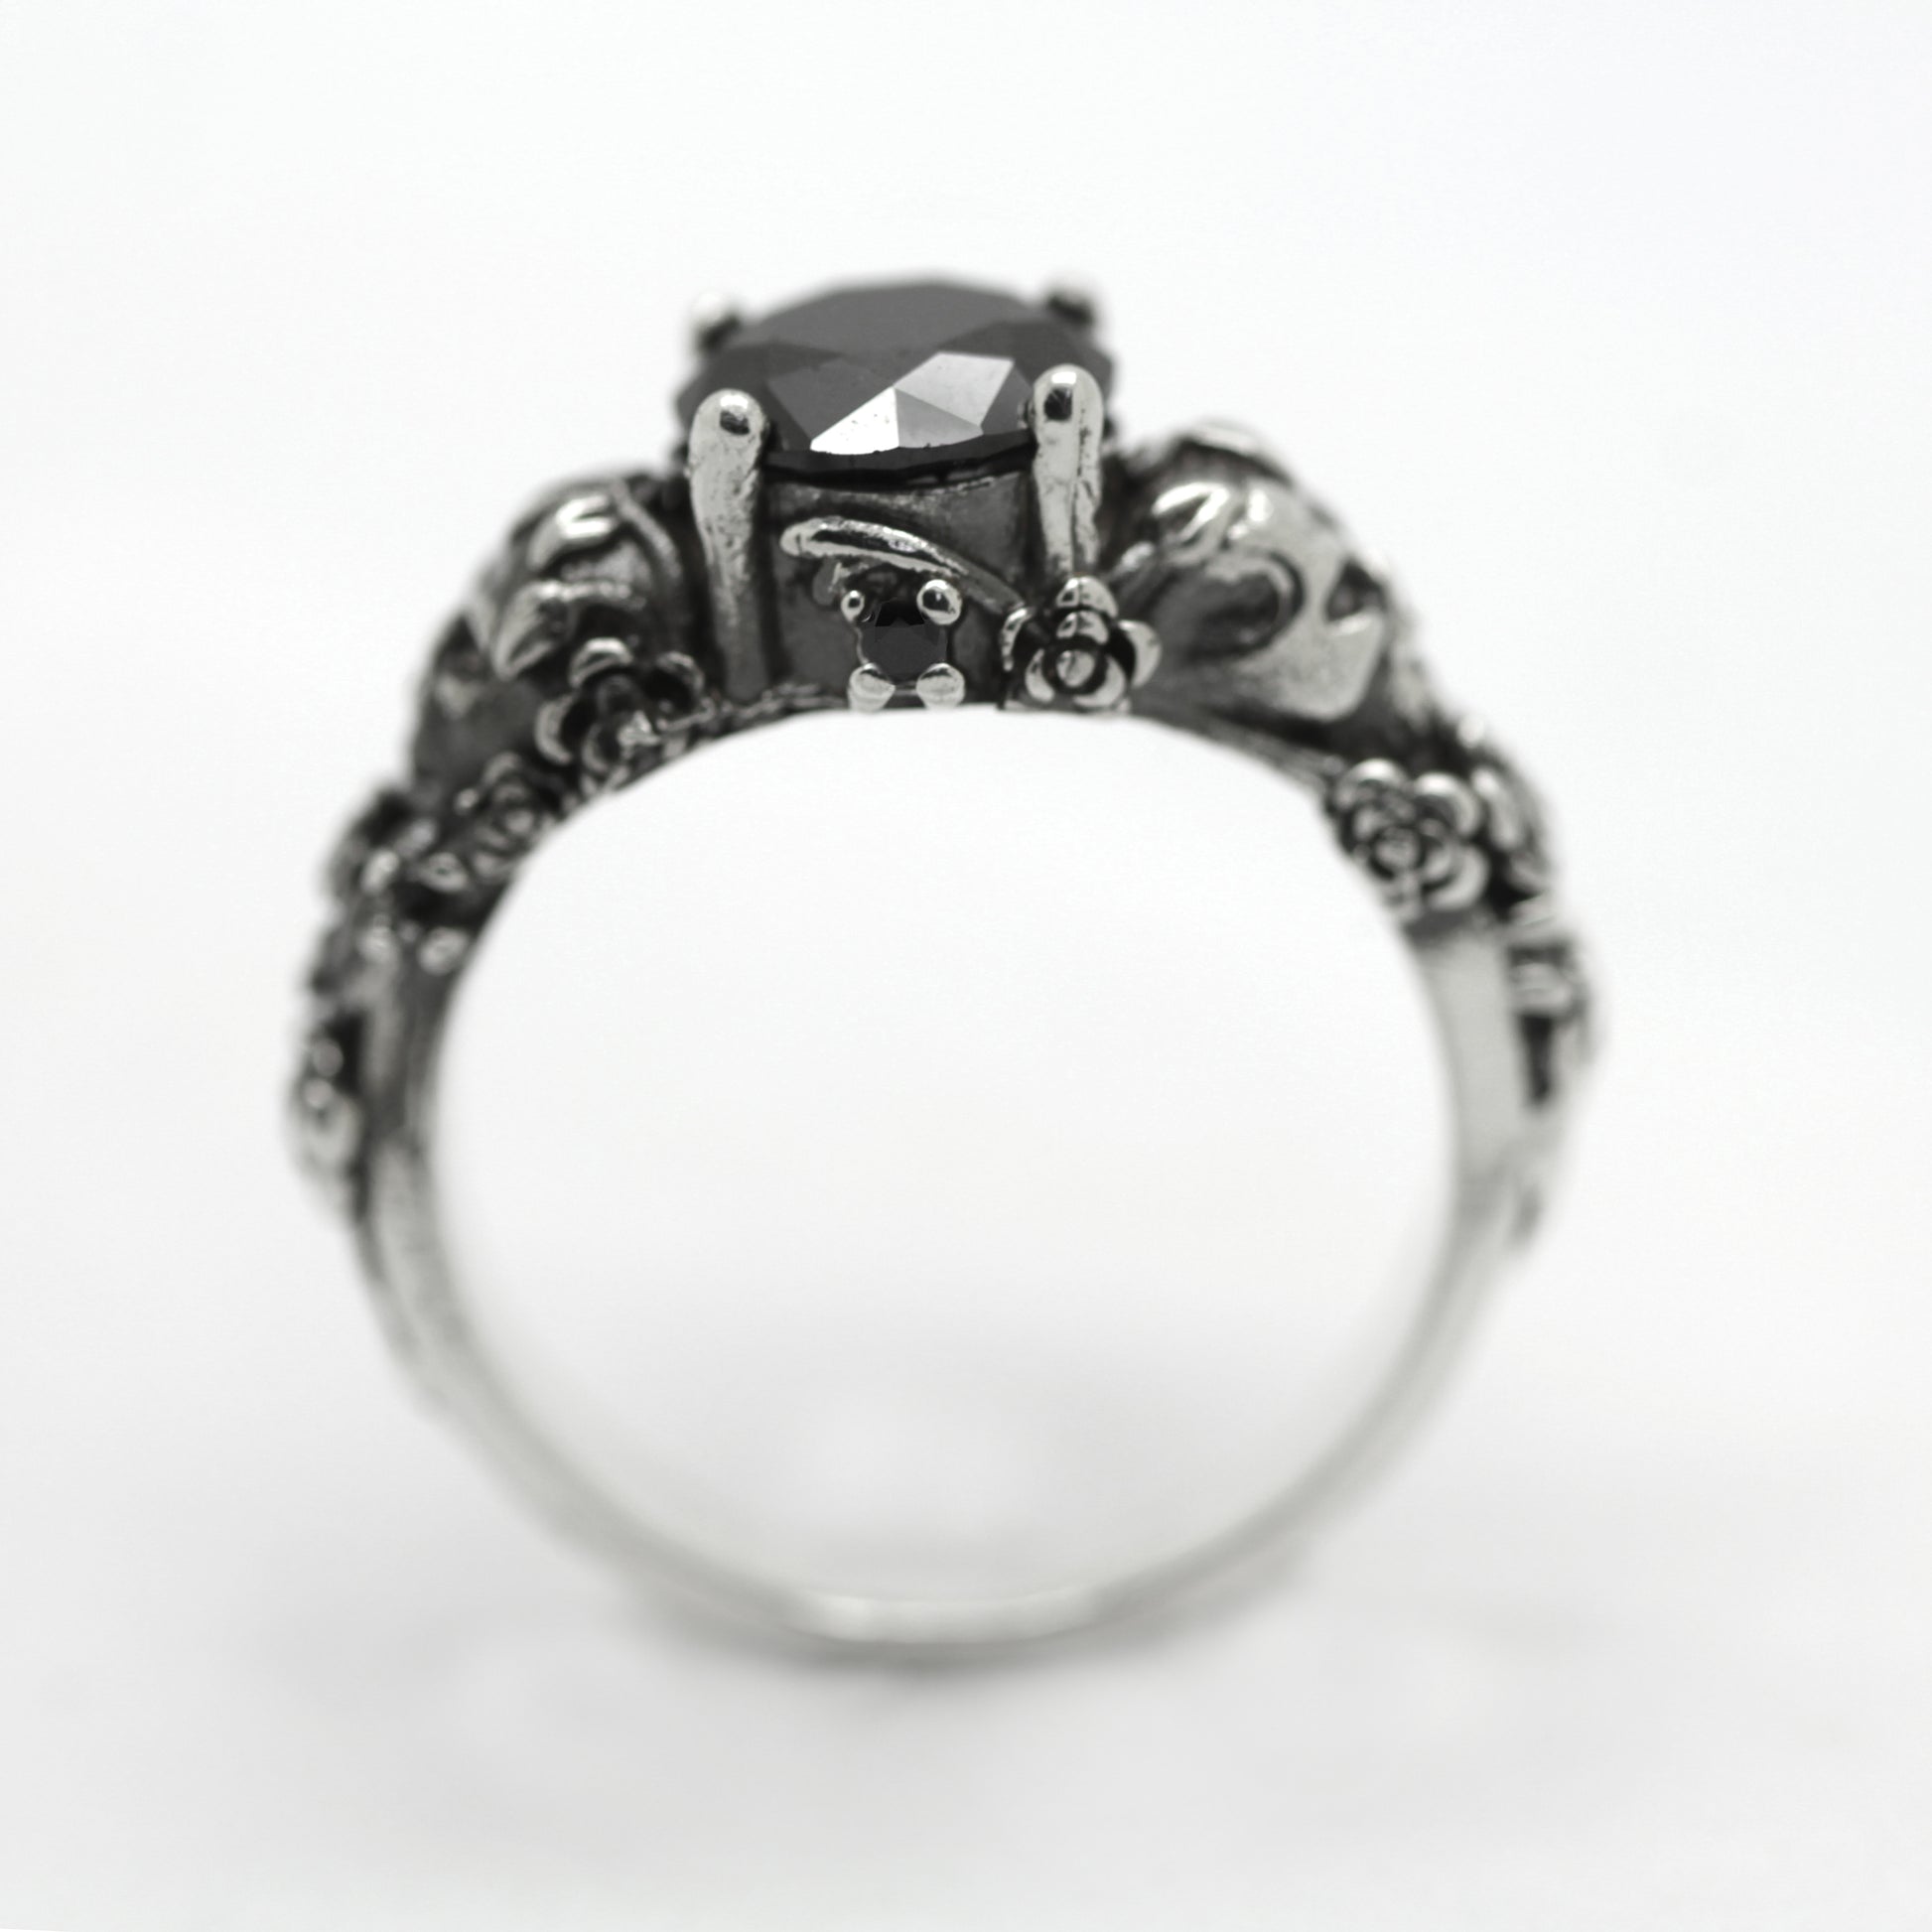 Gothic Skull and Roses, Black Round Gemstone, Skeleton Sterling Silver Ring, Love to Death